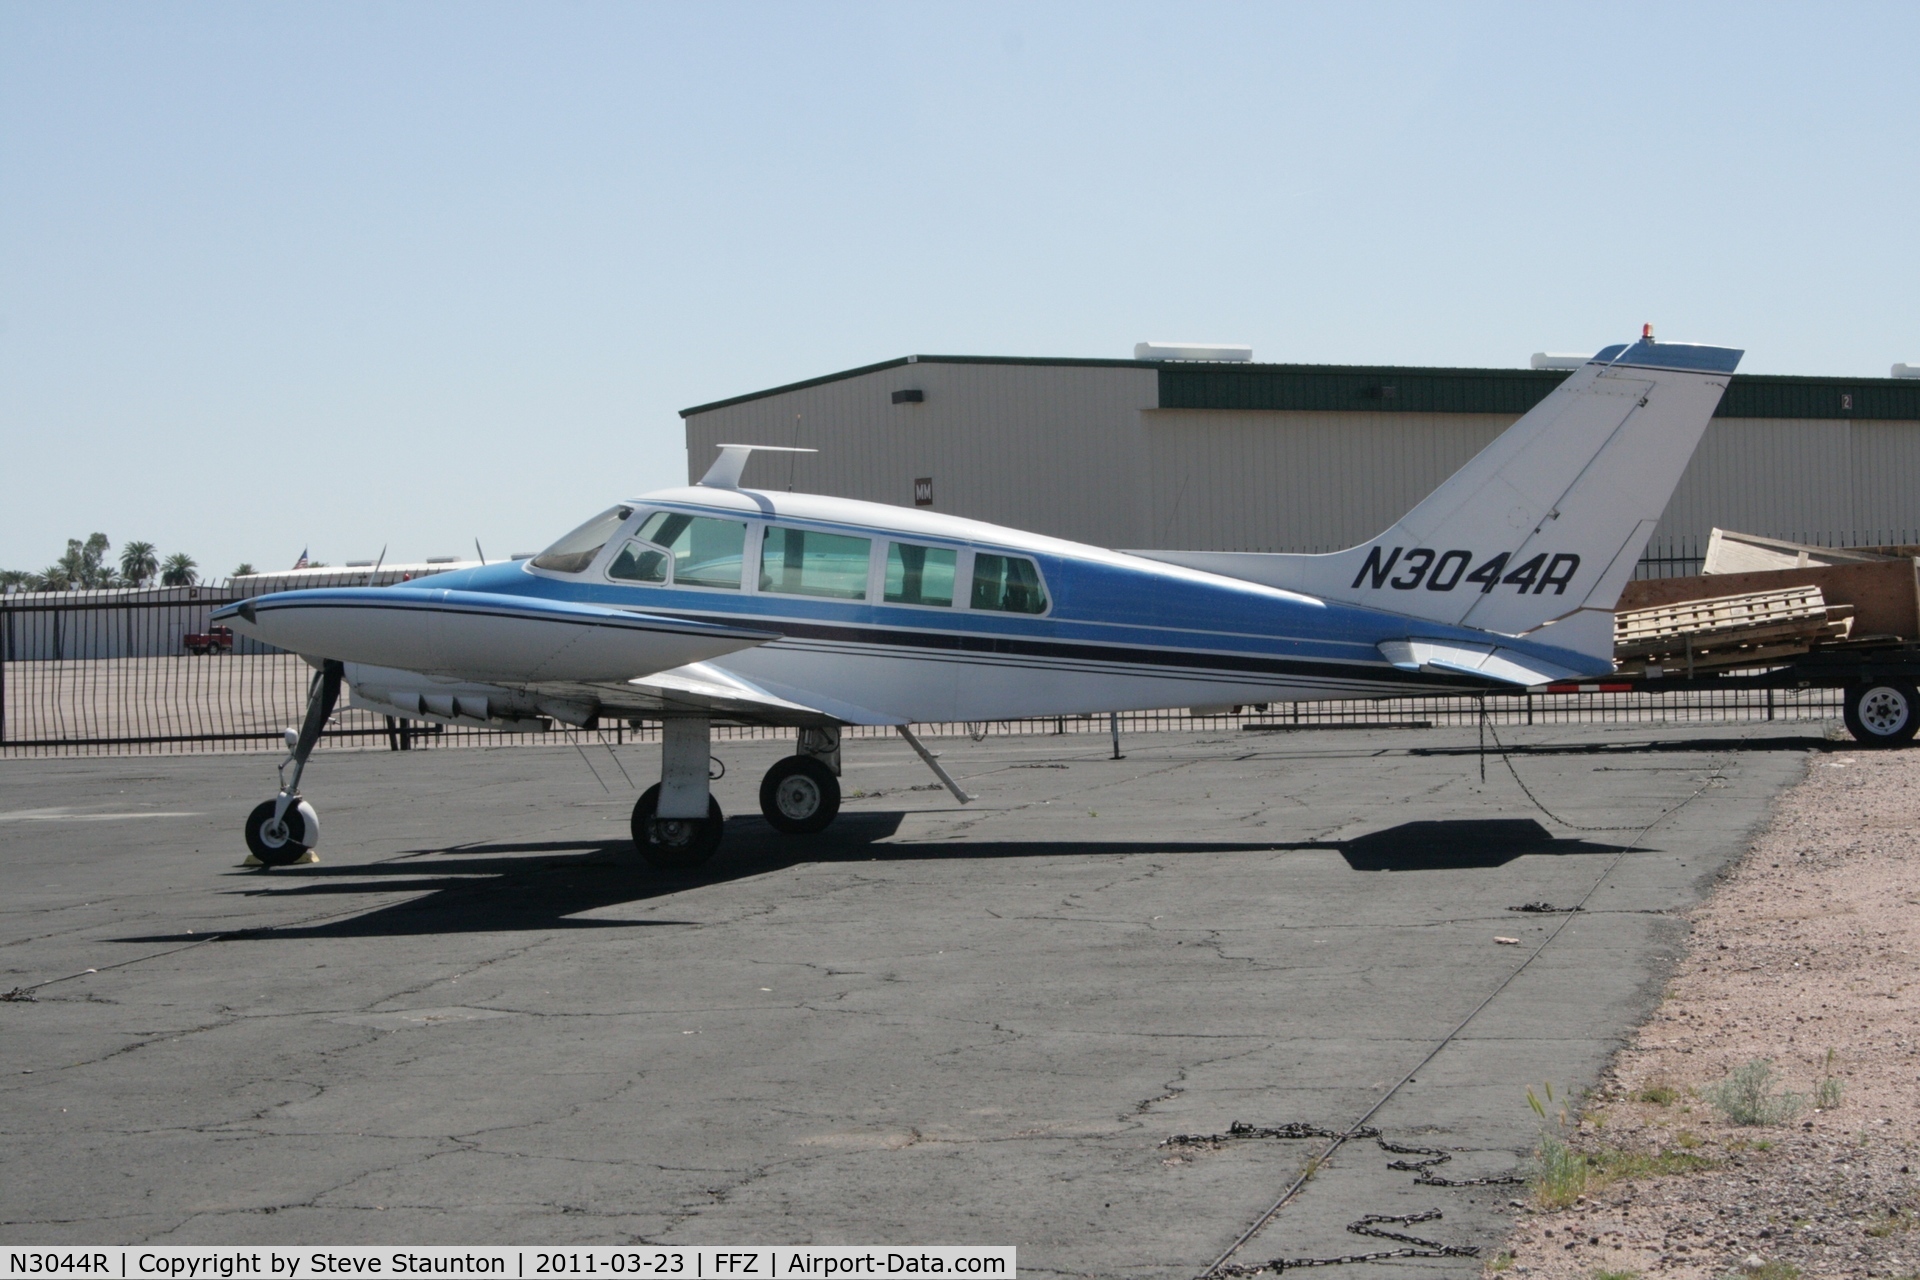 N3044R, 1963 Cessna 320A Skyknight C/N 320A0044, Taken at Falcon Field Airport, in March 2011 whilst on an Aeroprint Aviation tour